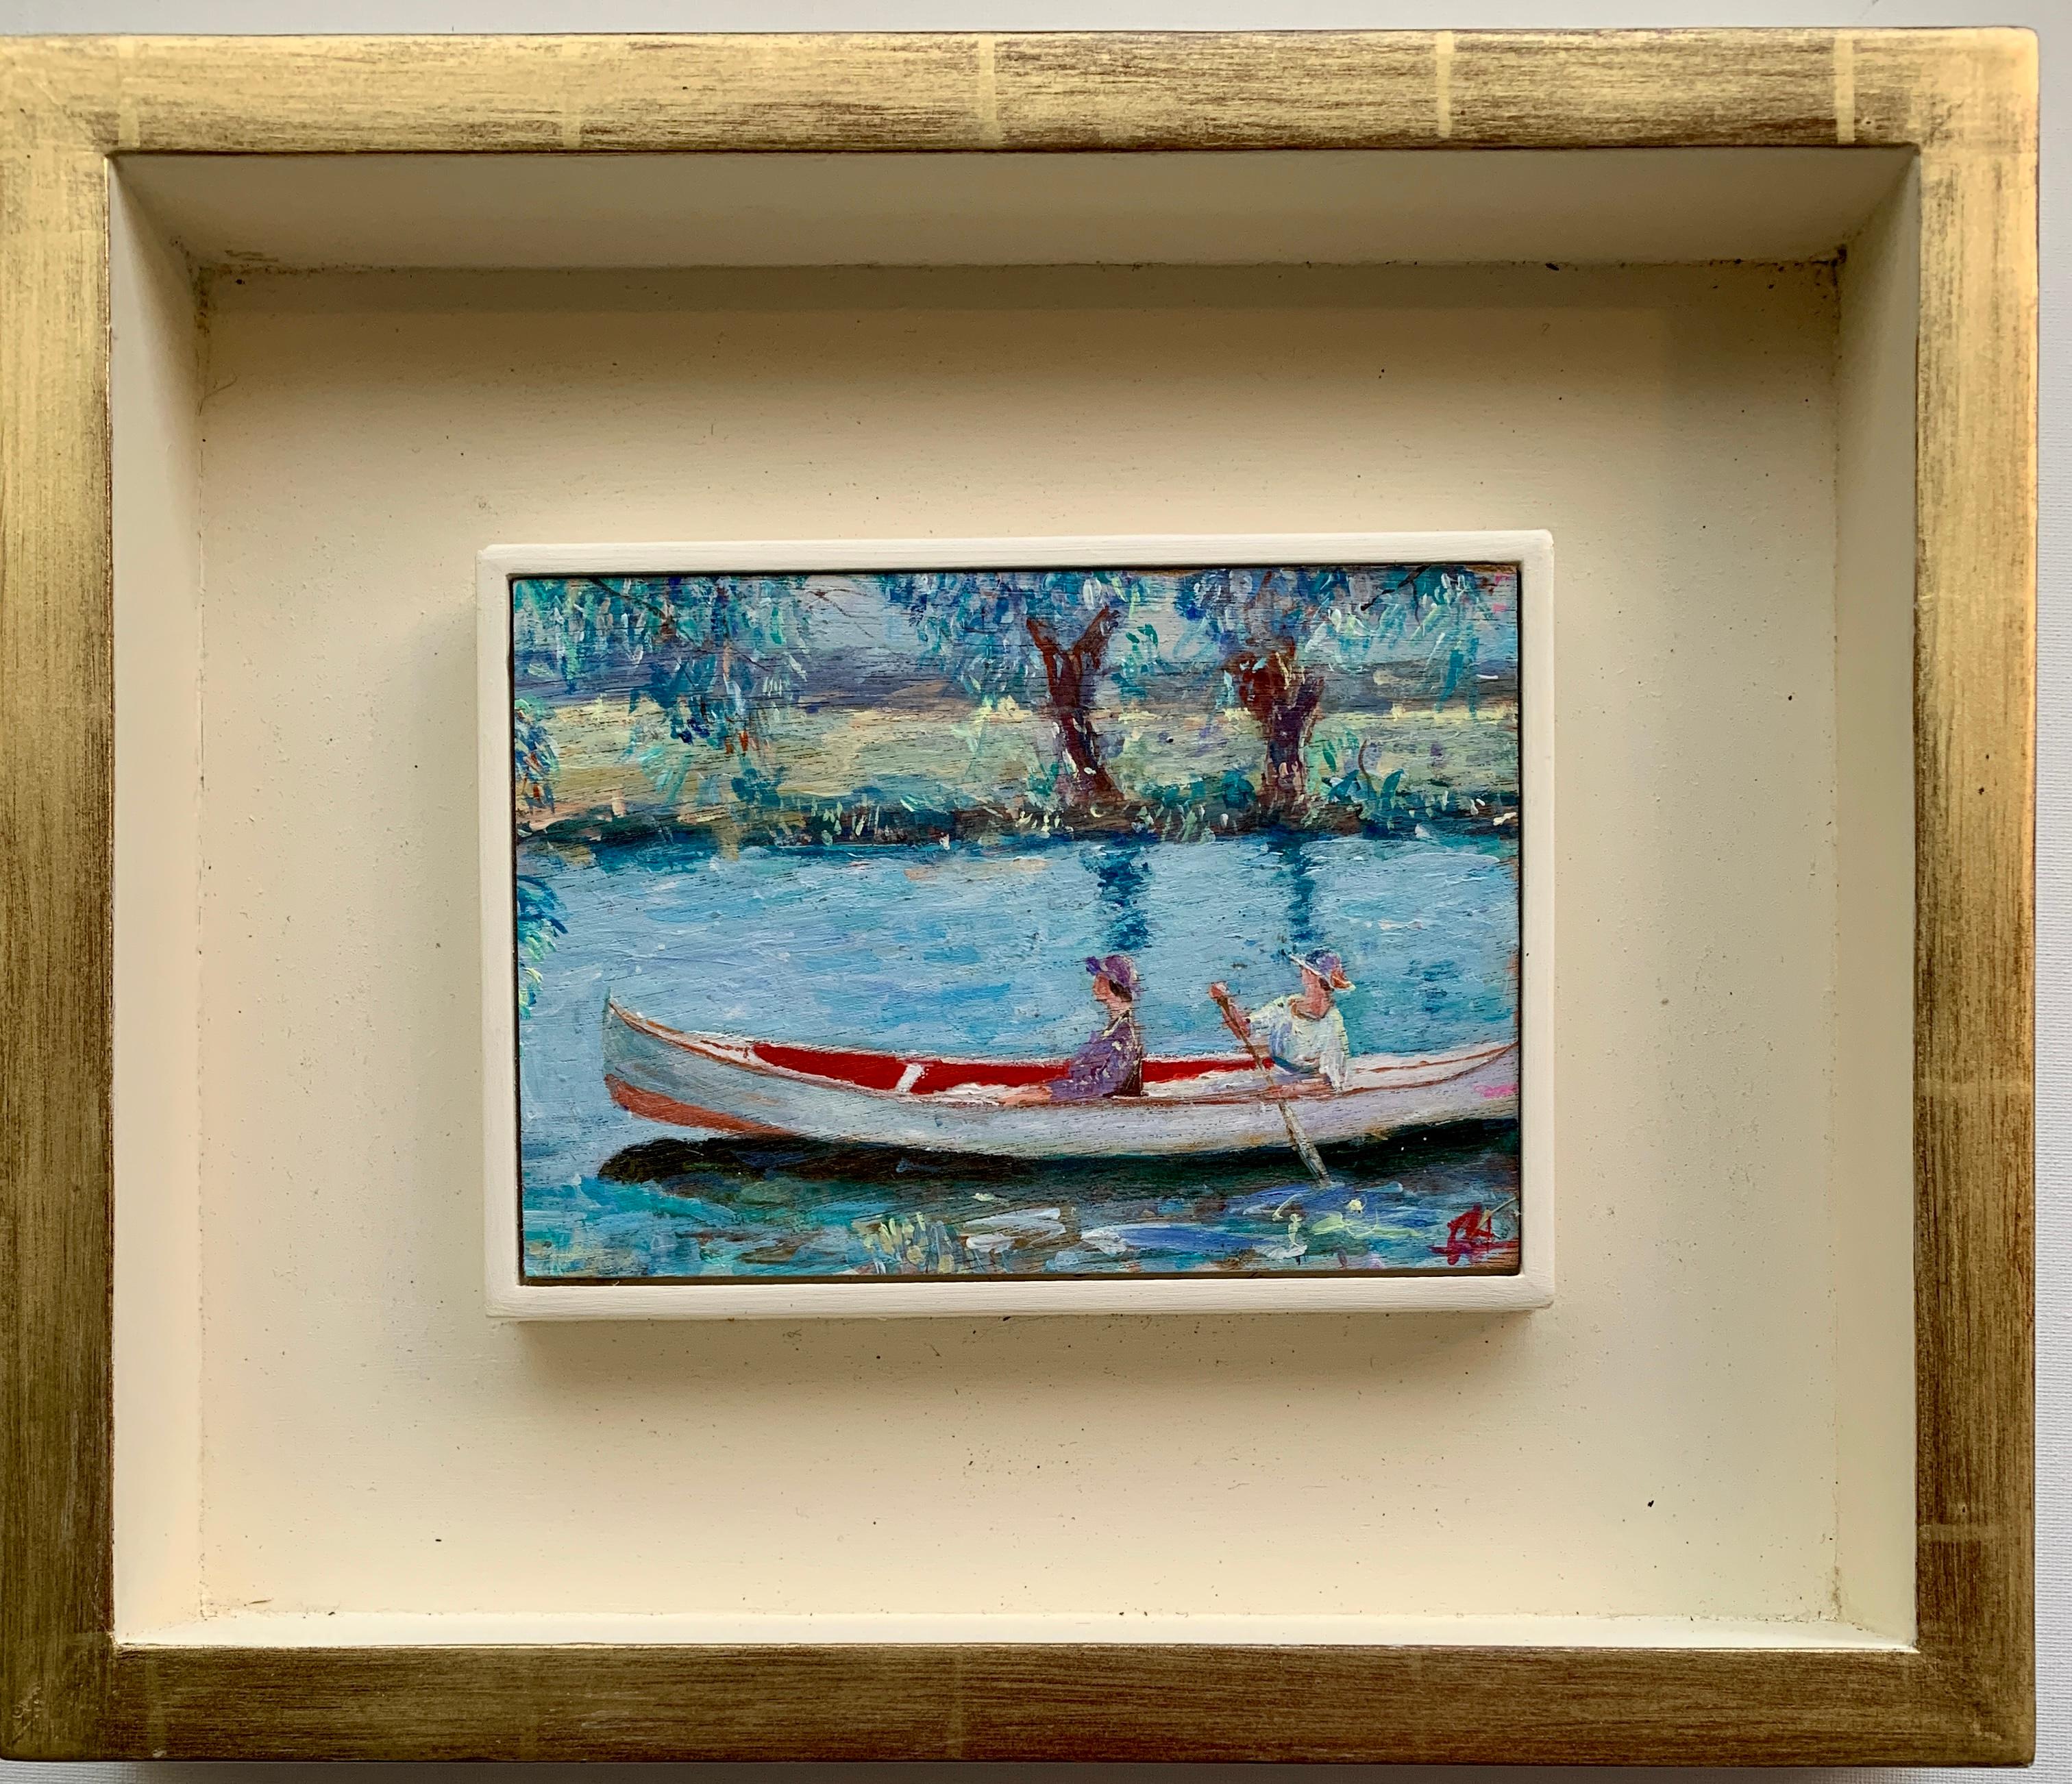 English Impressionist scene of two women in a canoe, on a river landscape 